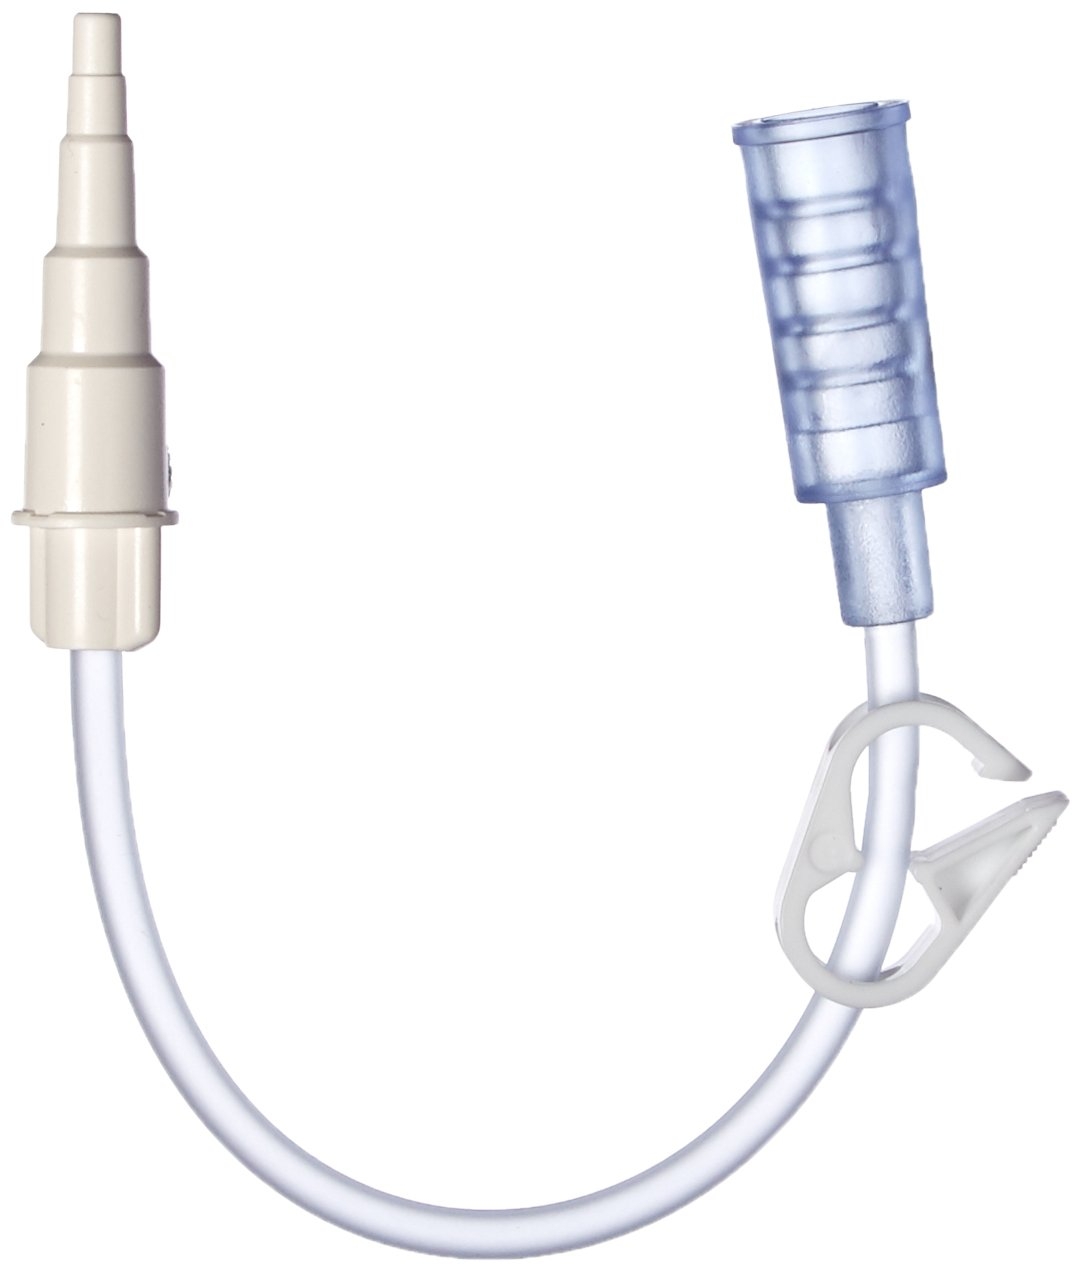 Halyard MIC-KEY Feeding Extension Set with Stepped Connectors: Reusable, DEHP-Free, Bolus and Stepped Connectors